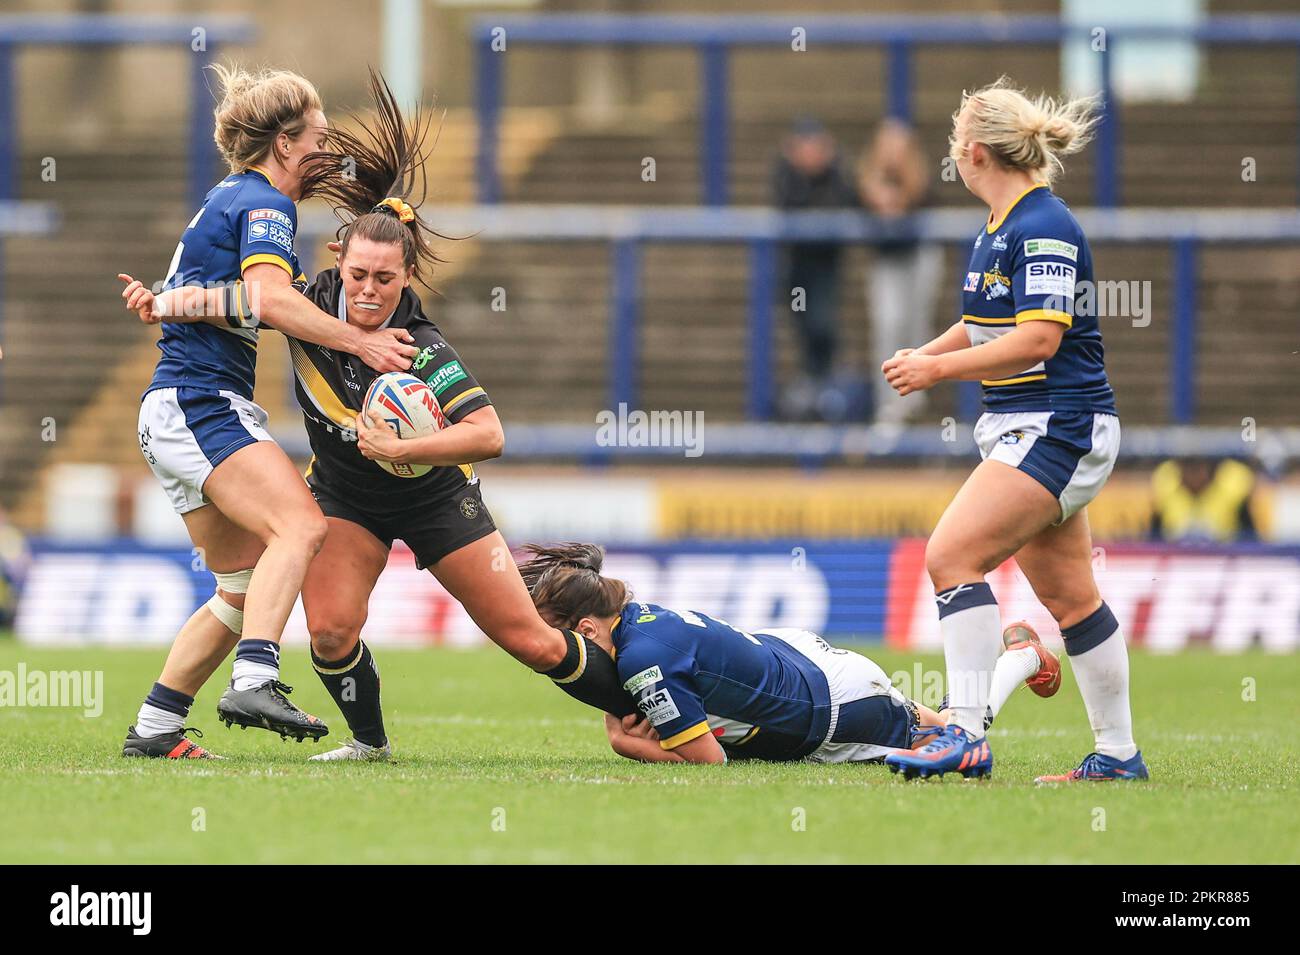 Lacey Owen of York Valkyrie is tackled by Bethan Dainton of Leeds Rhinos and Hanna Butcher of Leeds Rhinos during the Betfred Women's Super League match Leeds Rhinos vs York Valkyrie at Headingley Stadium, Leeds, United Kingdom, 9th April 2023  (Photo by Mark Cosgrove/News Images) Stock Photo